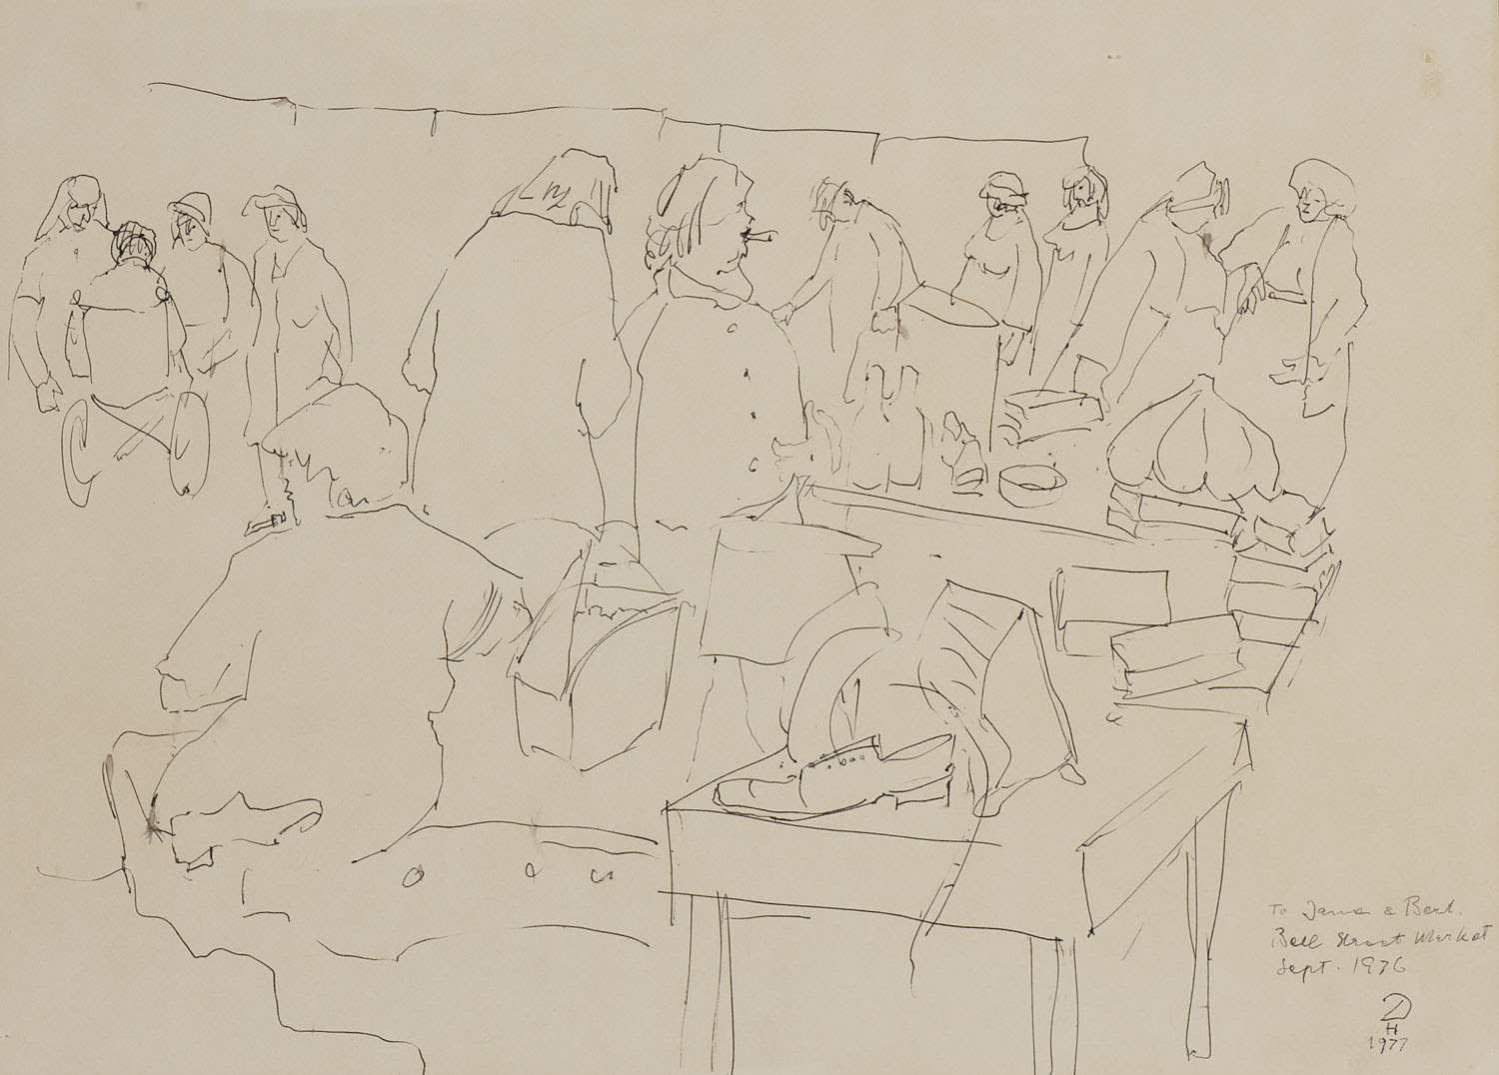 Hugo Dachinger (1908-1995) Bell Street Market 1977 Pen and ink on paper 28 x 39 cm Ben Uri Collection © Hugo Dachinger estate To see and discover more about his artist click here